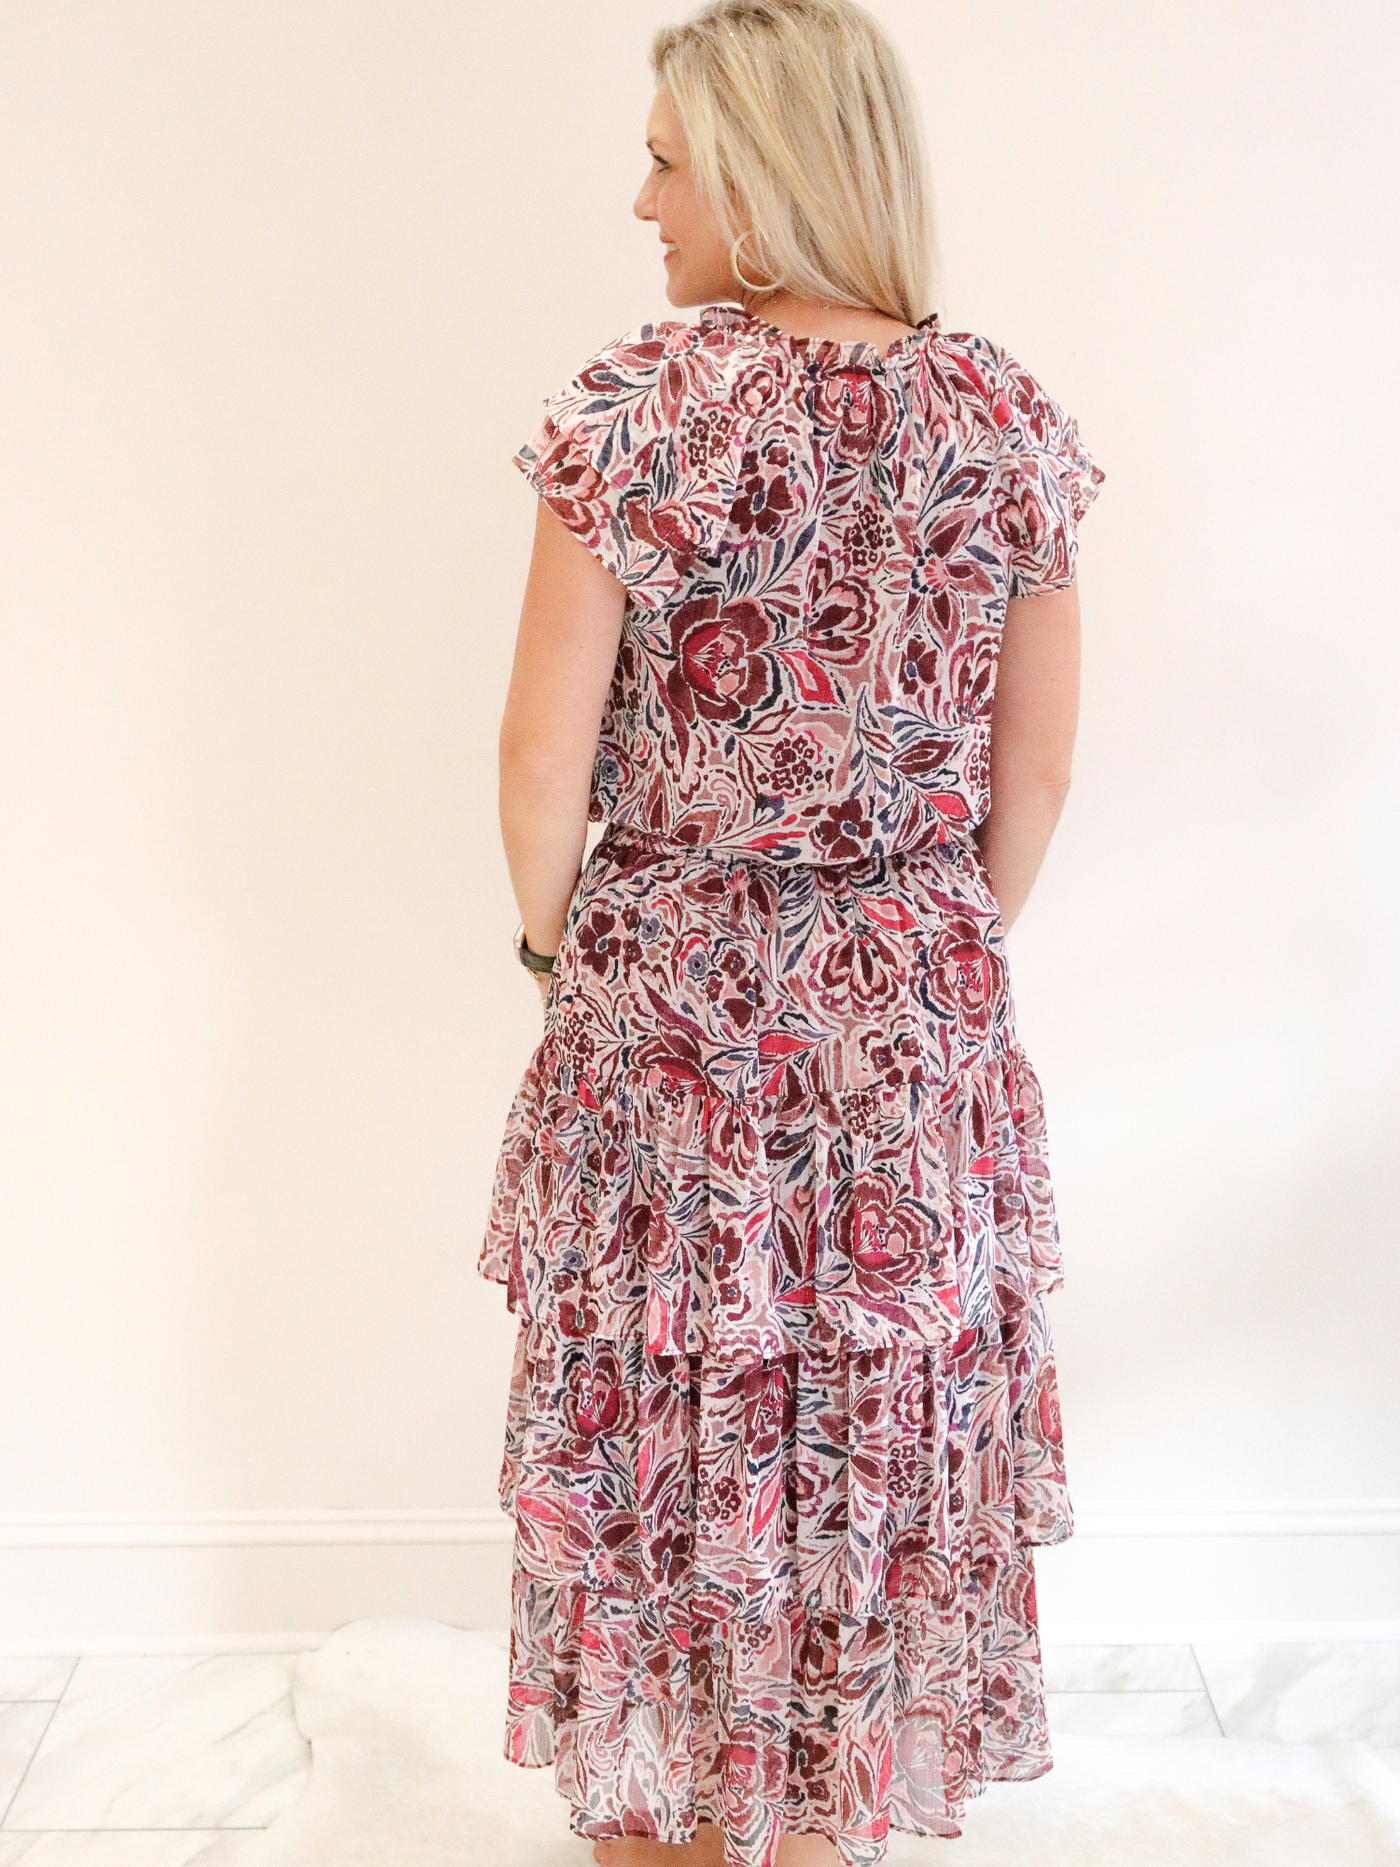 Orchid Floral Ruffle Midi Skirt back view with matching shirt.